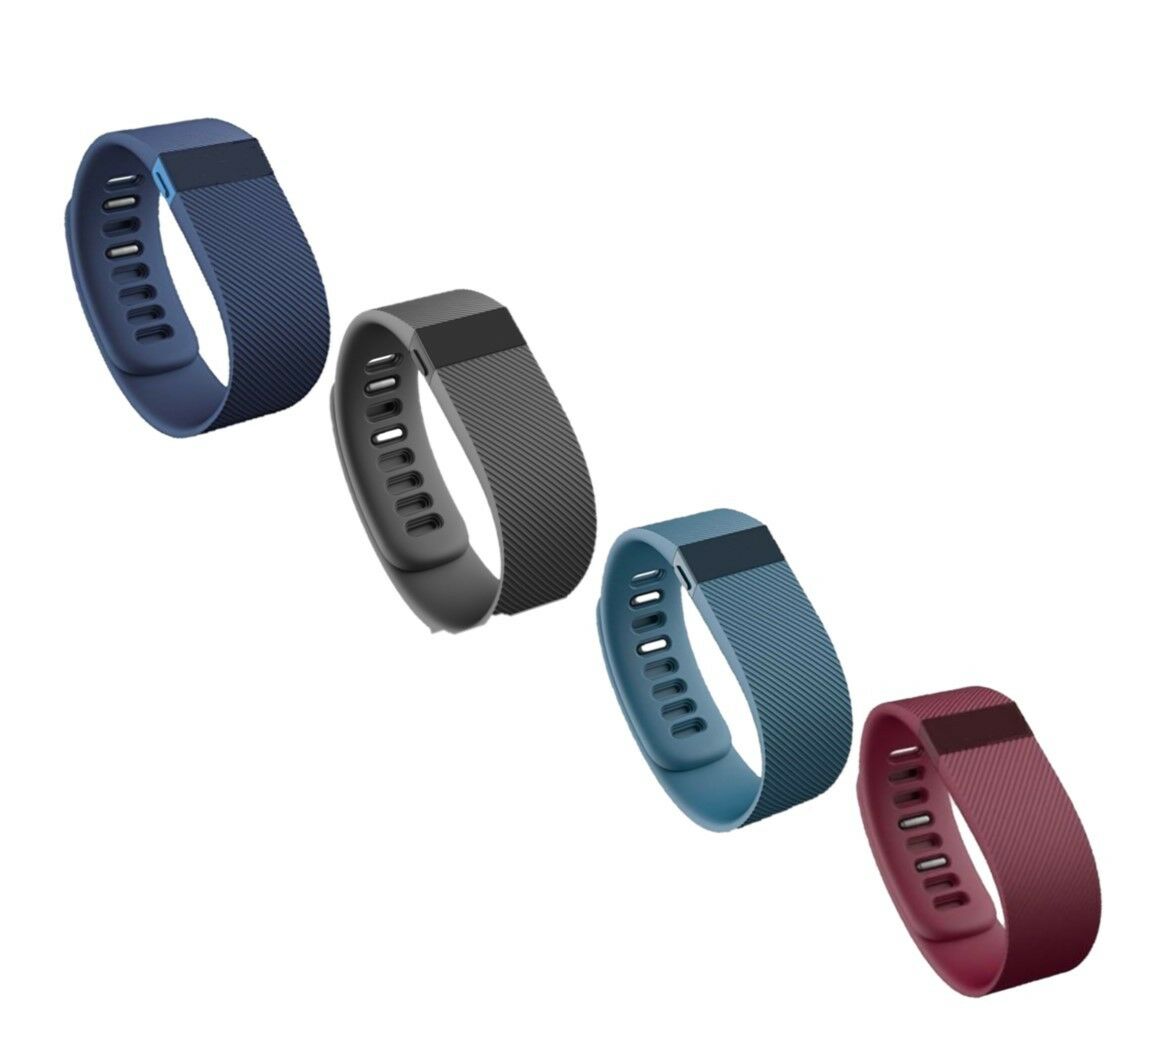 Fitbit Charge Wristband Fitness Activity Tracker Black ,blue, Slate Fb404